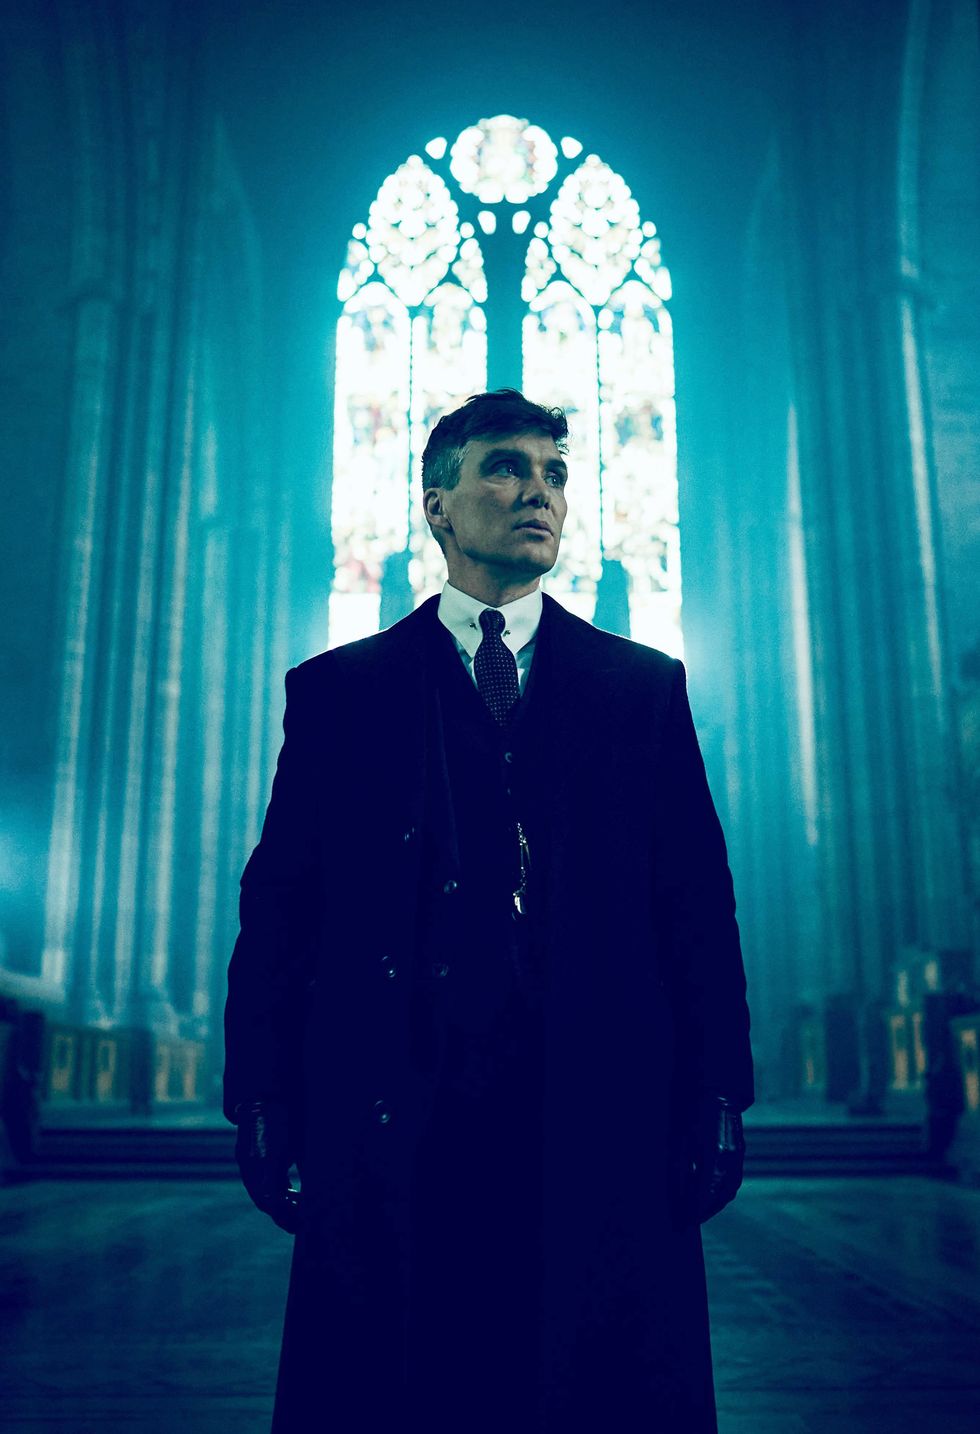 Peaky Blinders Film: What You Need To, Including Cast, Release Date, Plot &  Trailer